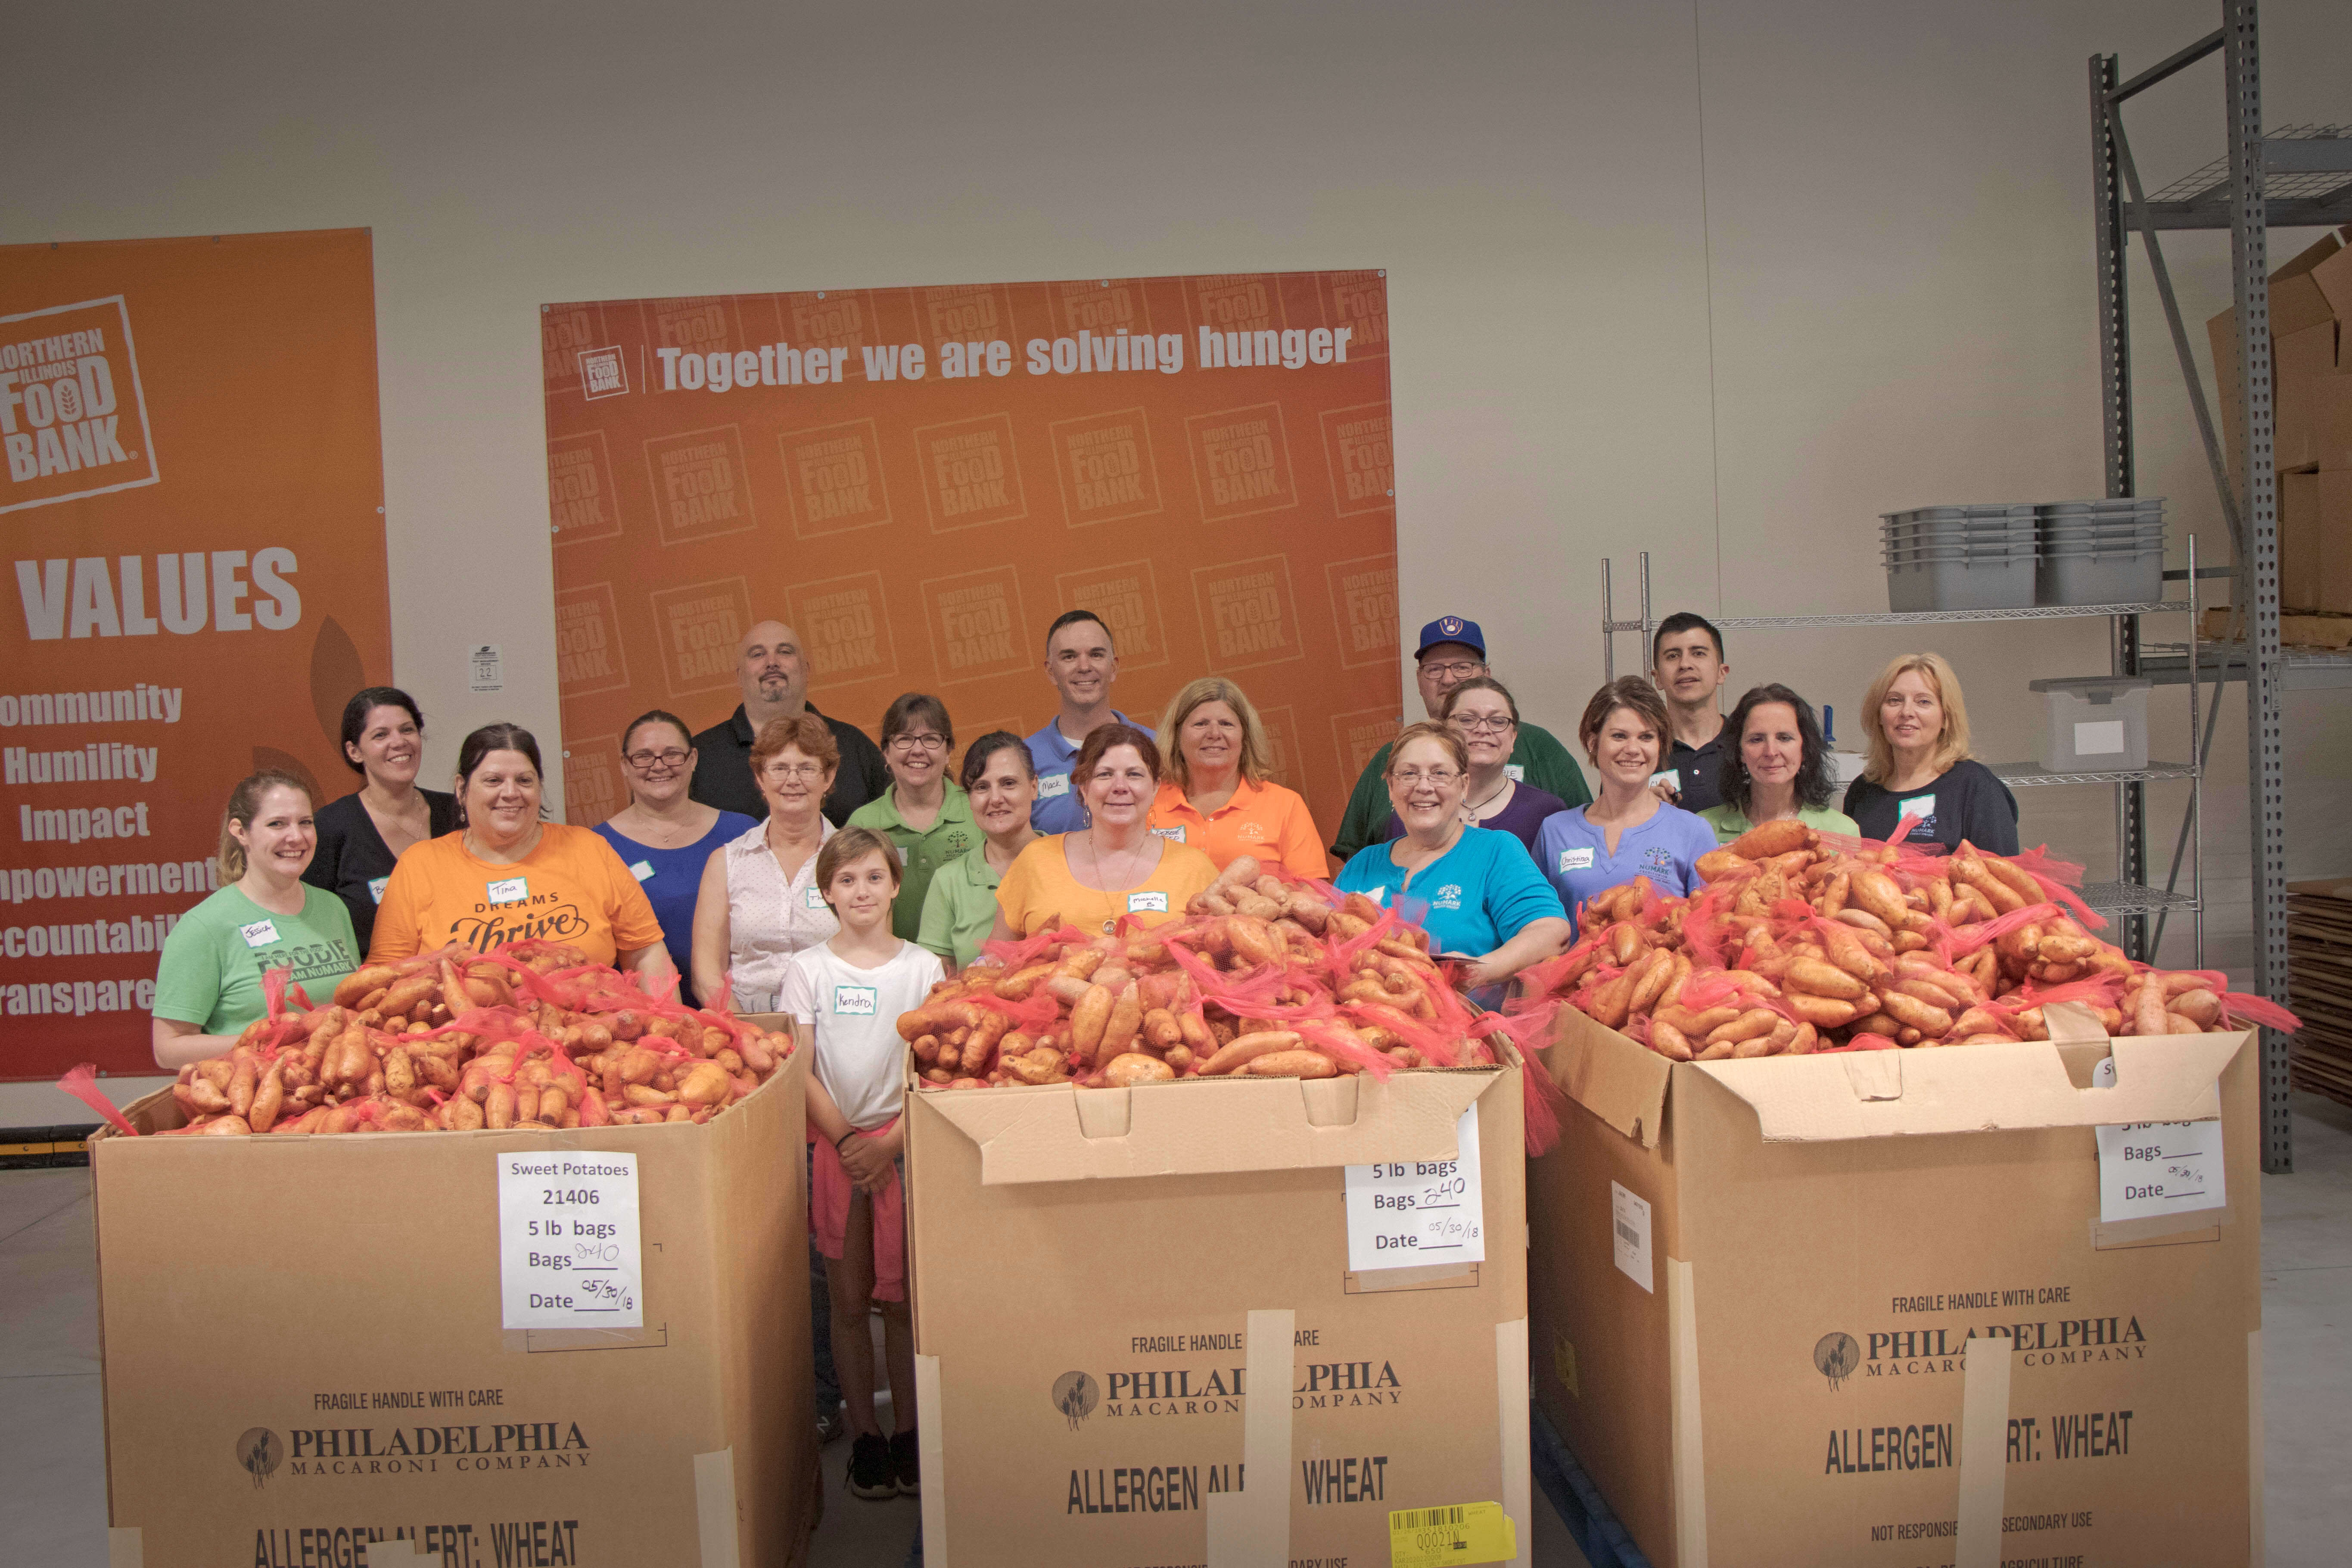 Volunteers with boxes of potatoes packed